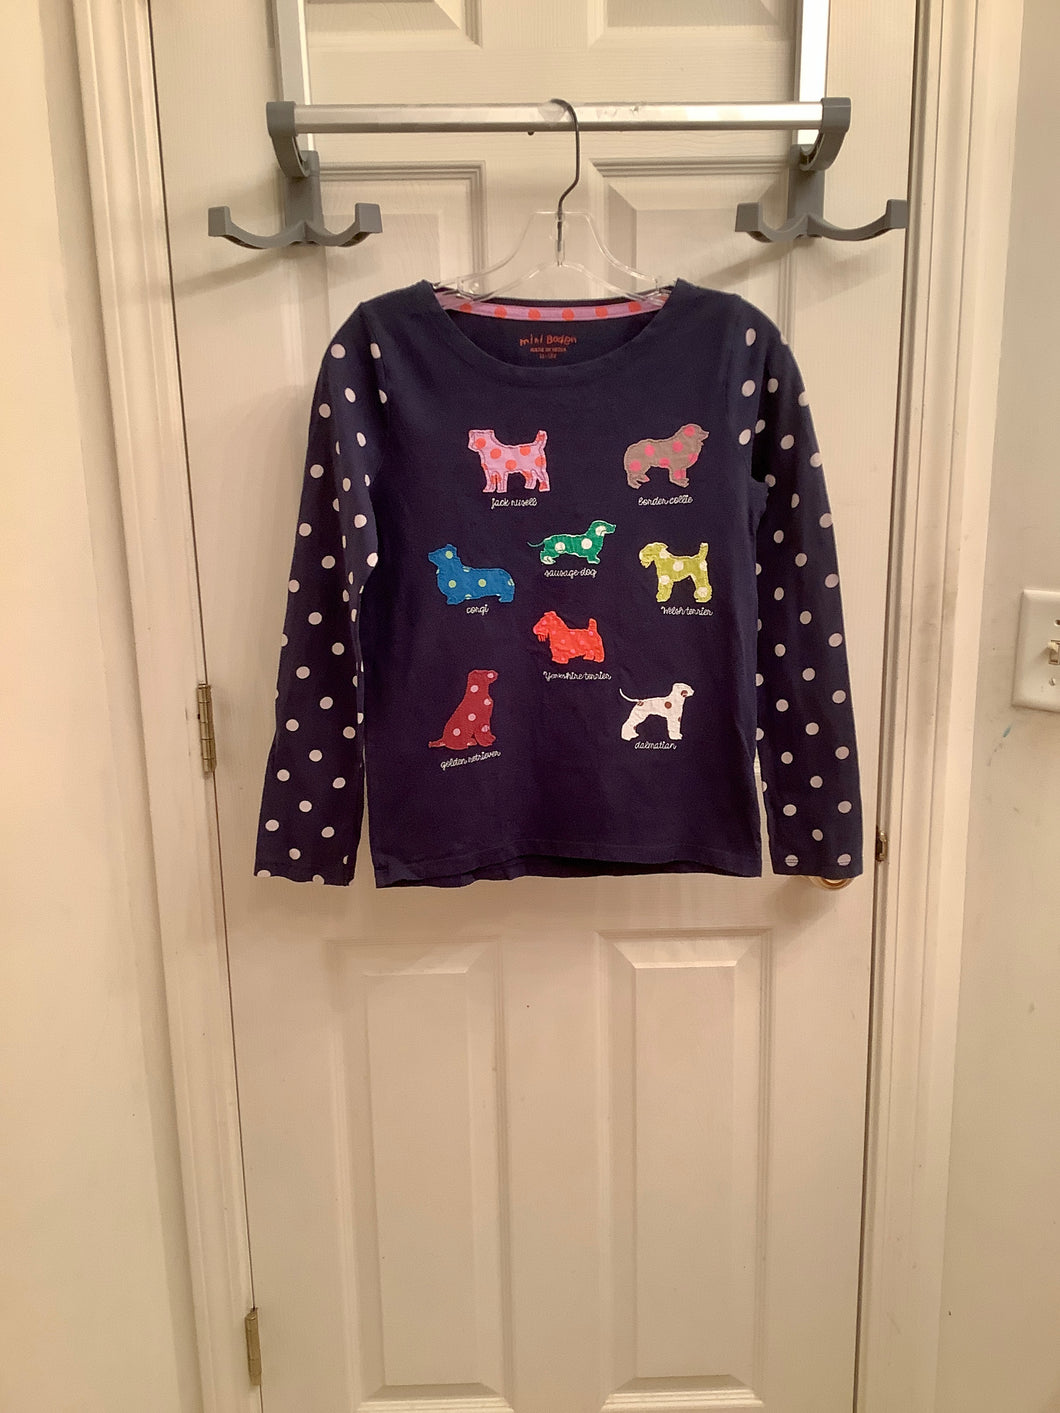 Mini Boden Navy Knit Top with Dog Appliques and Polka Dots Long Sleeves 11